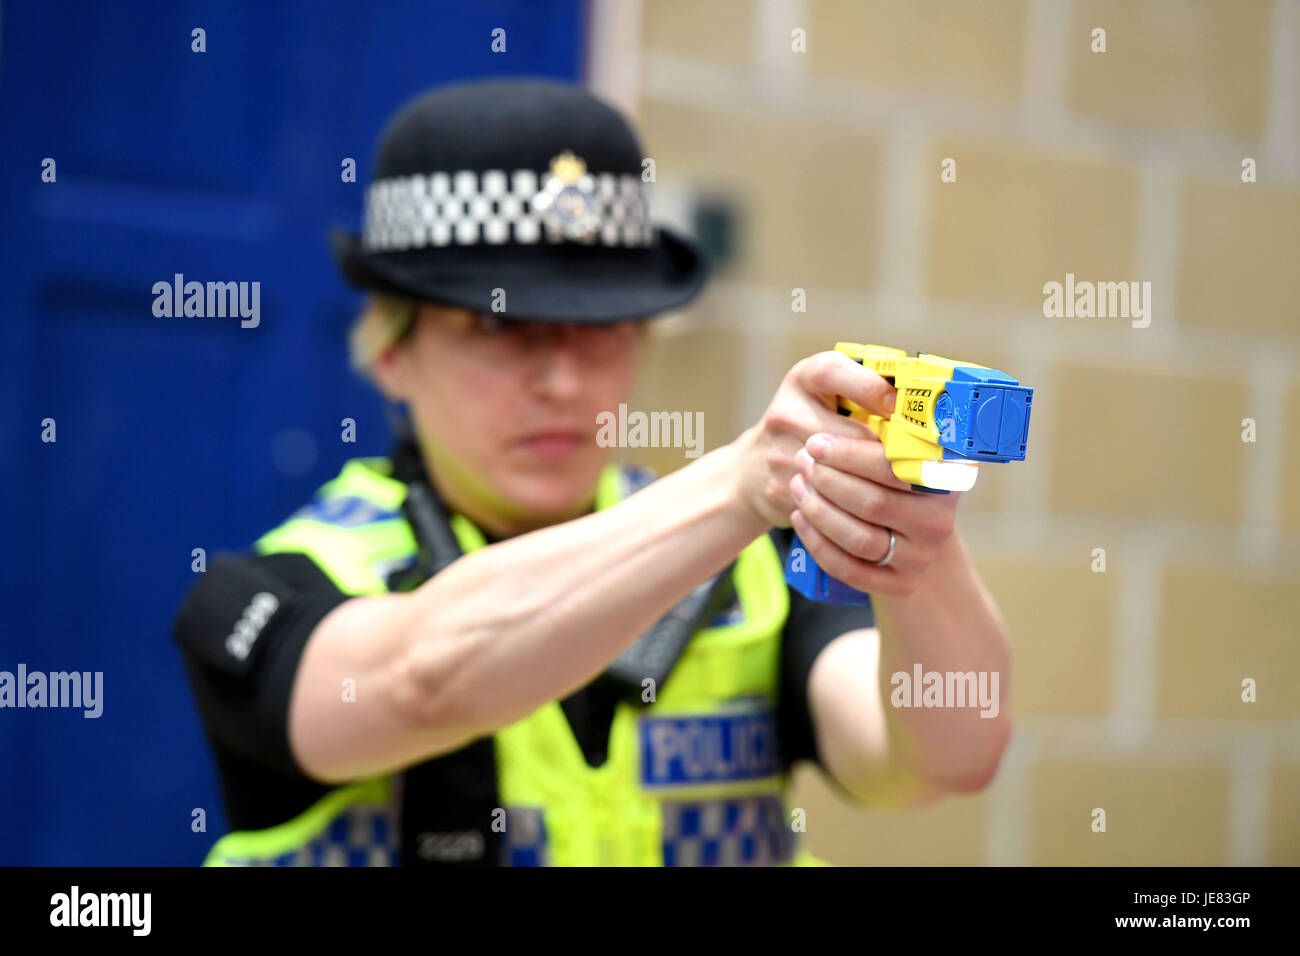 Taser, police officer using a taser during training. The focus of the event is to demonstrate the transparency around Dorset Police's use of force and the challenges involved, along with an overview of equipment and the skills that improve public and officer safety.  This comes ahead of the publication of use of force data by individual police forces nationally at the end of July. An officer demonstrates using an X26 Taser Credit: Finnbarr Webster/Alamy Live News Stock Photo